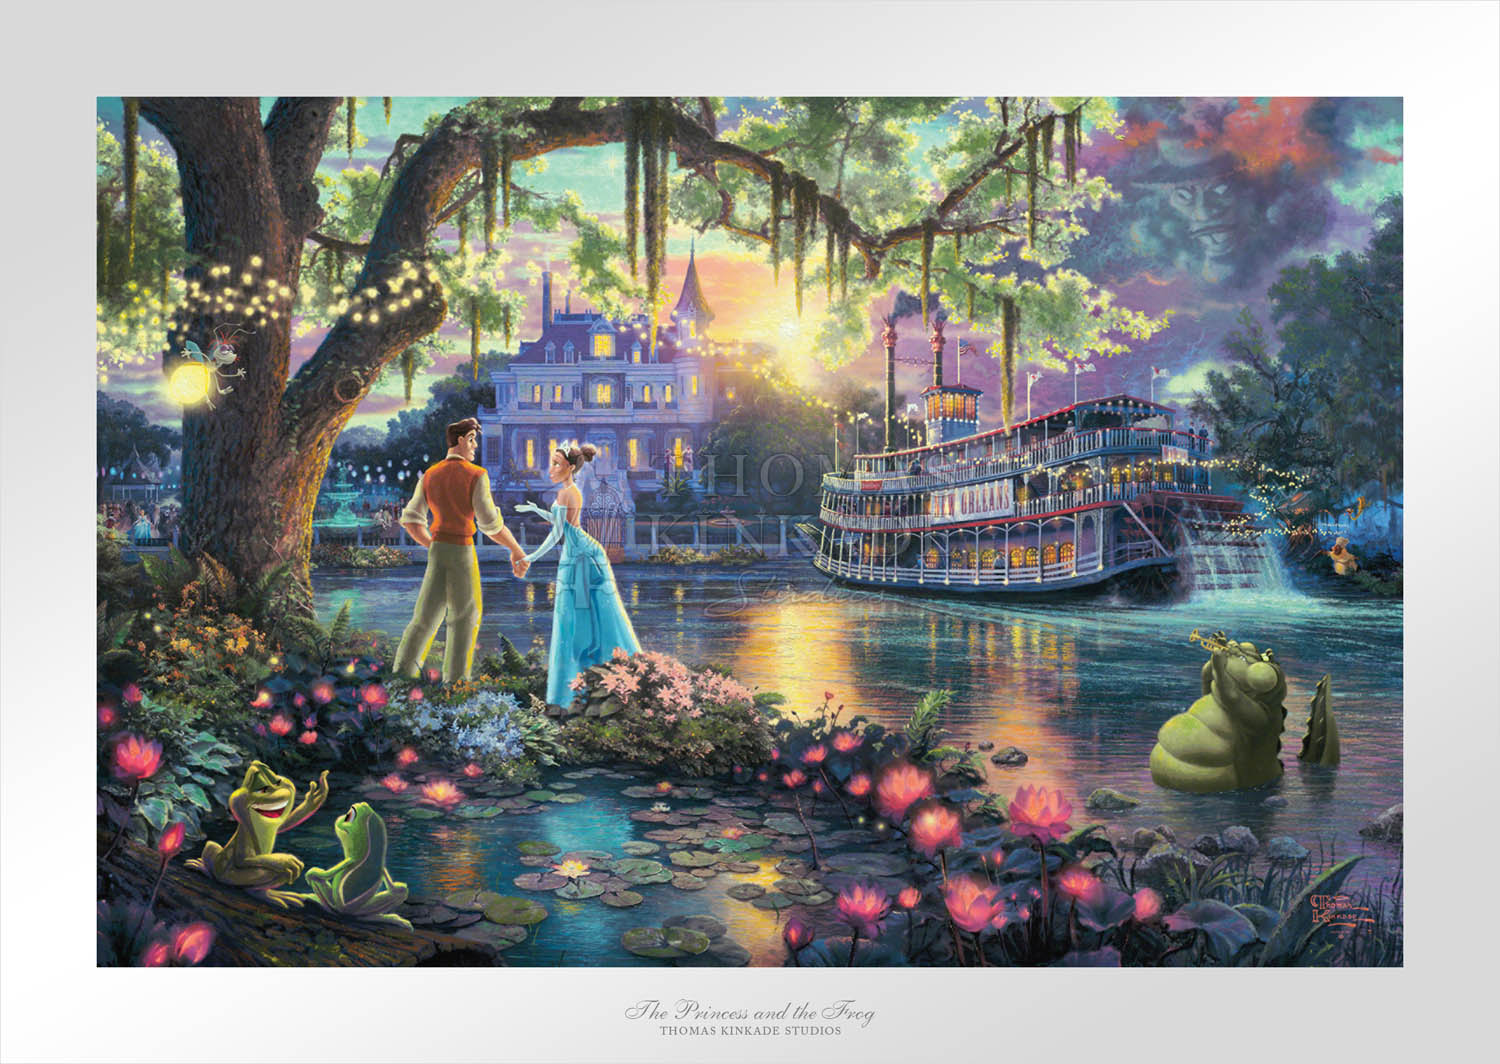 Tiana meets Prince Naveen, who are later turned into an amphibian by evil Dr. Facilier share the stage with the bayou river swamp. 